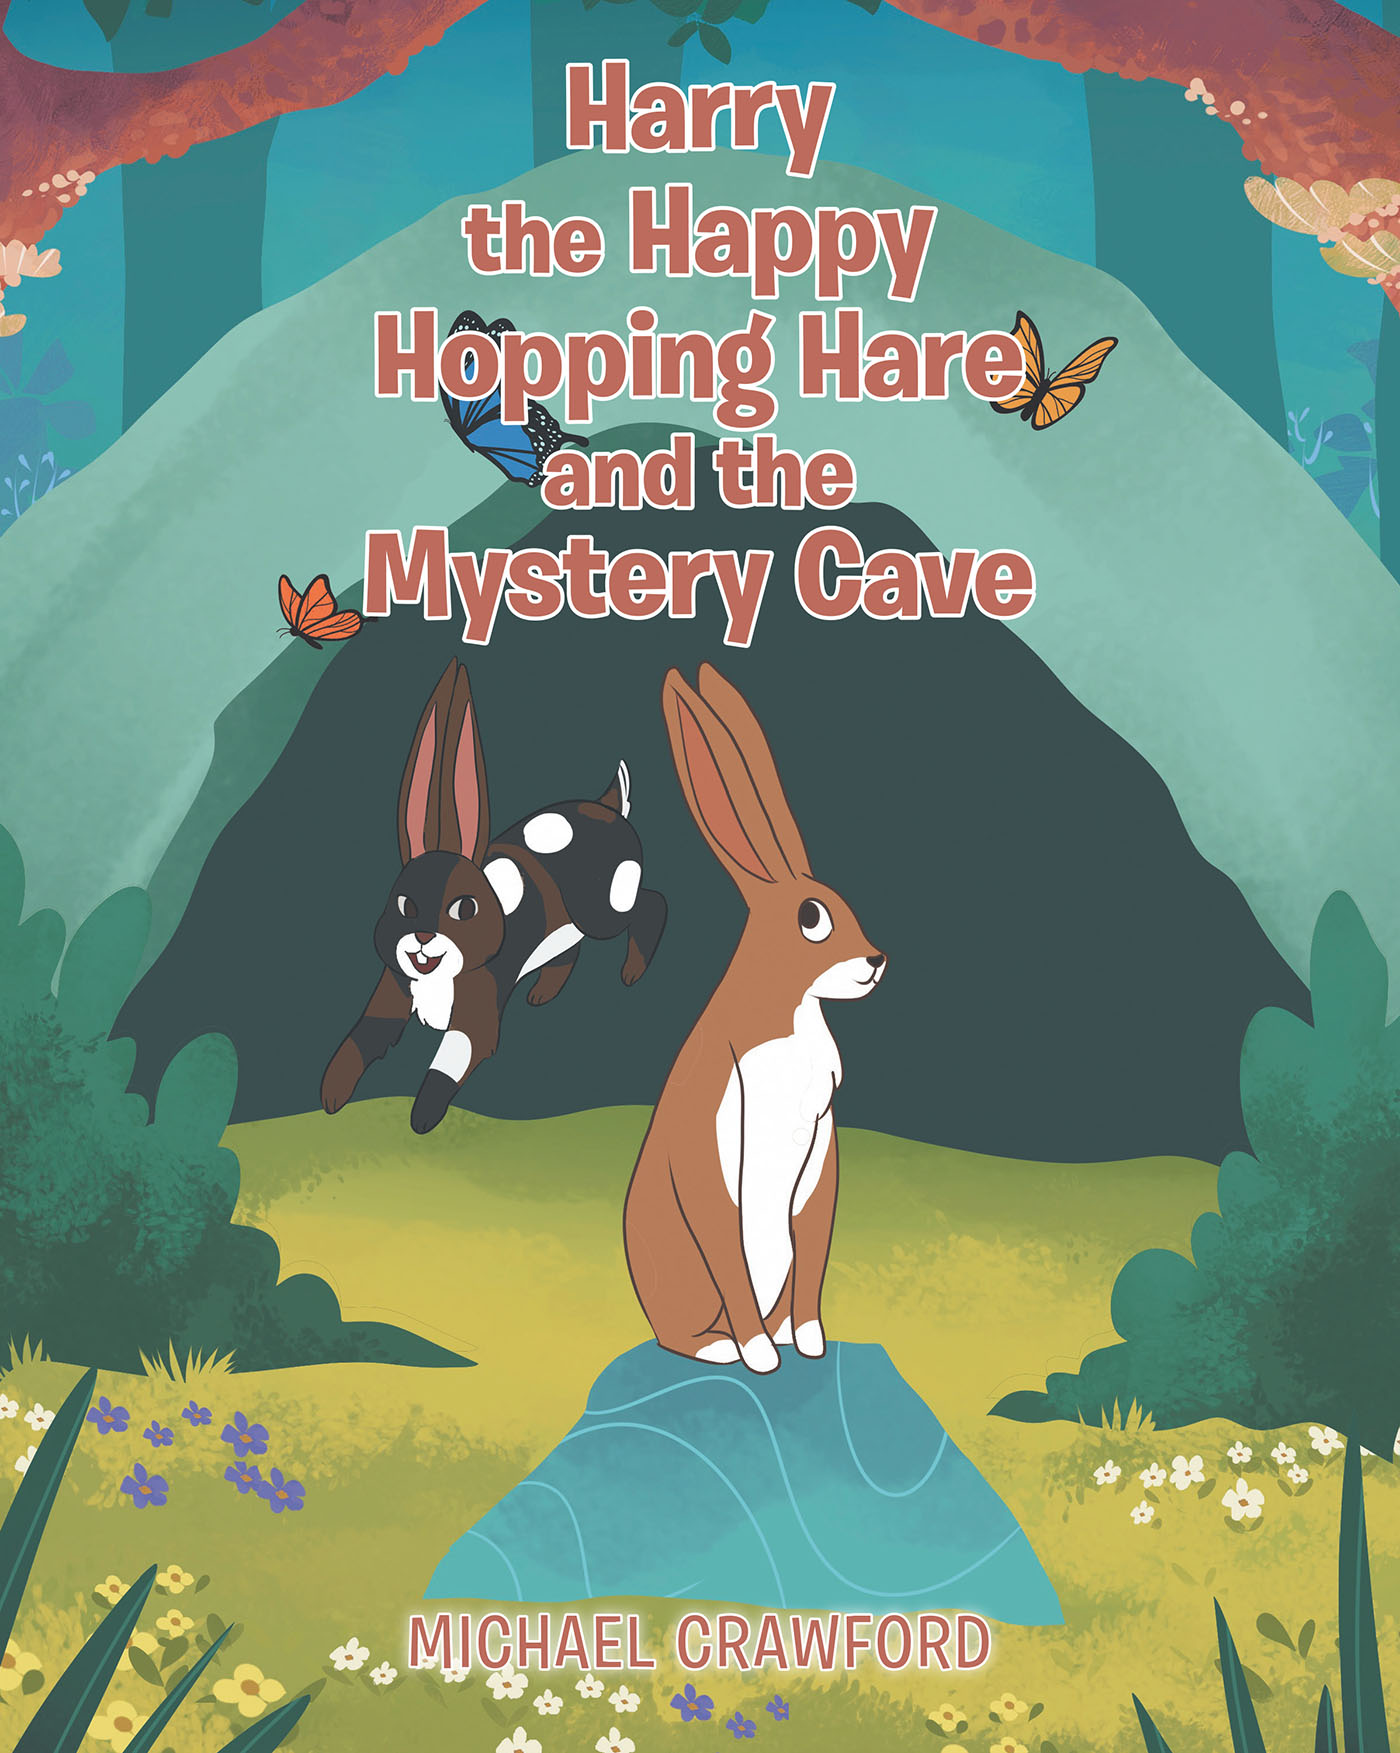 Author Michael Crawford’s New Book, "Harry the Happy Hopping Hare and the Mystery Cave," Follows a Hare Who Finds Himself on a Magical Adventure with a New Friend